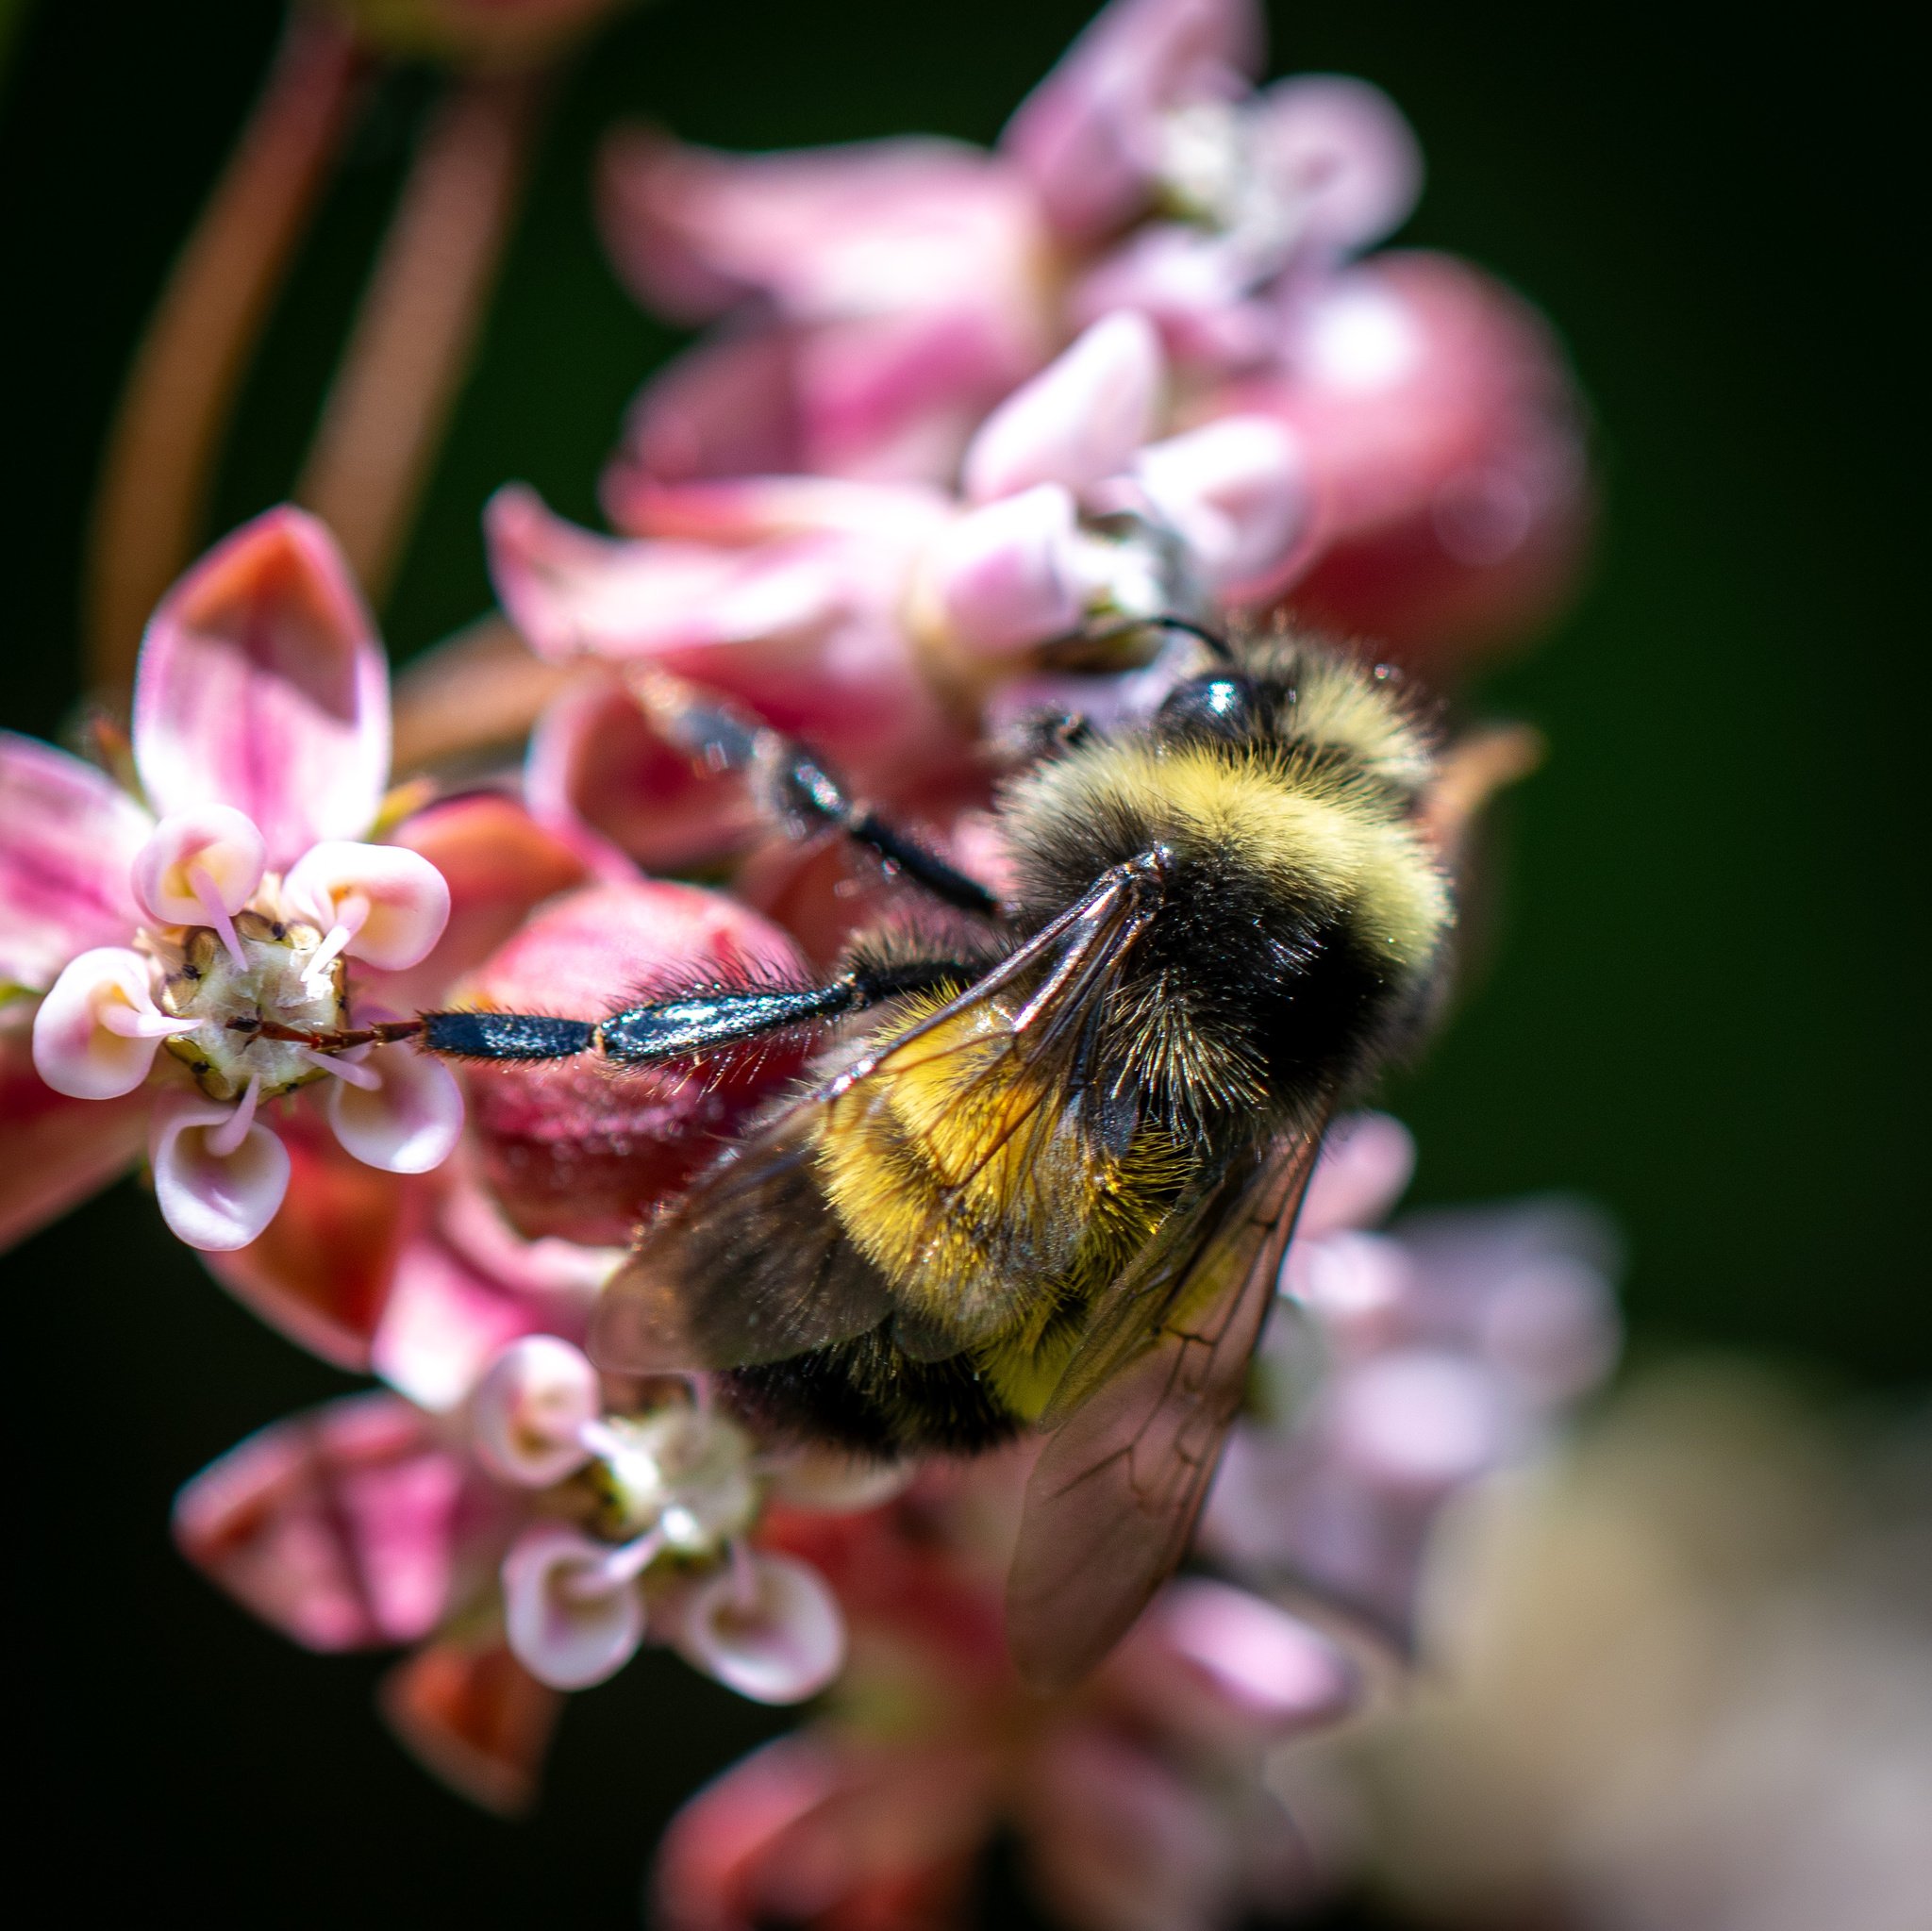 B terricola, a/k/a The Yellow-banded Bumble Bee